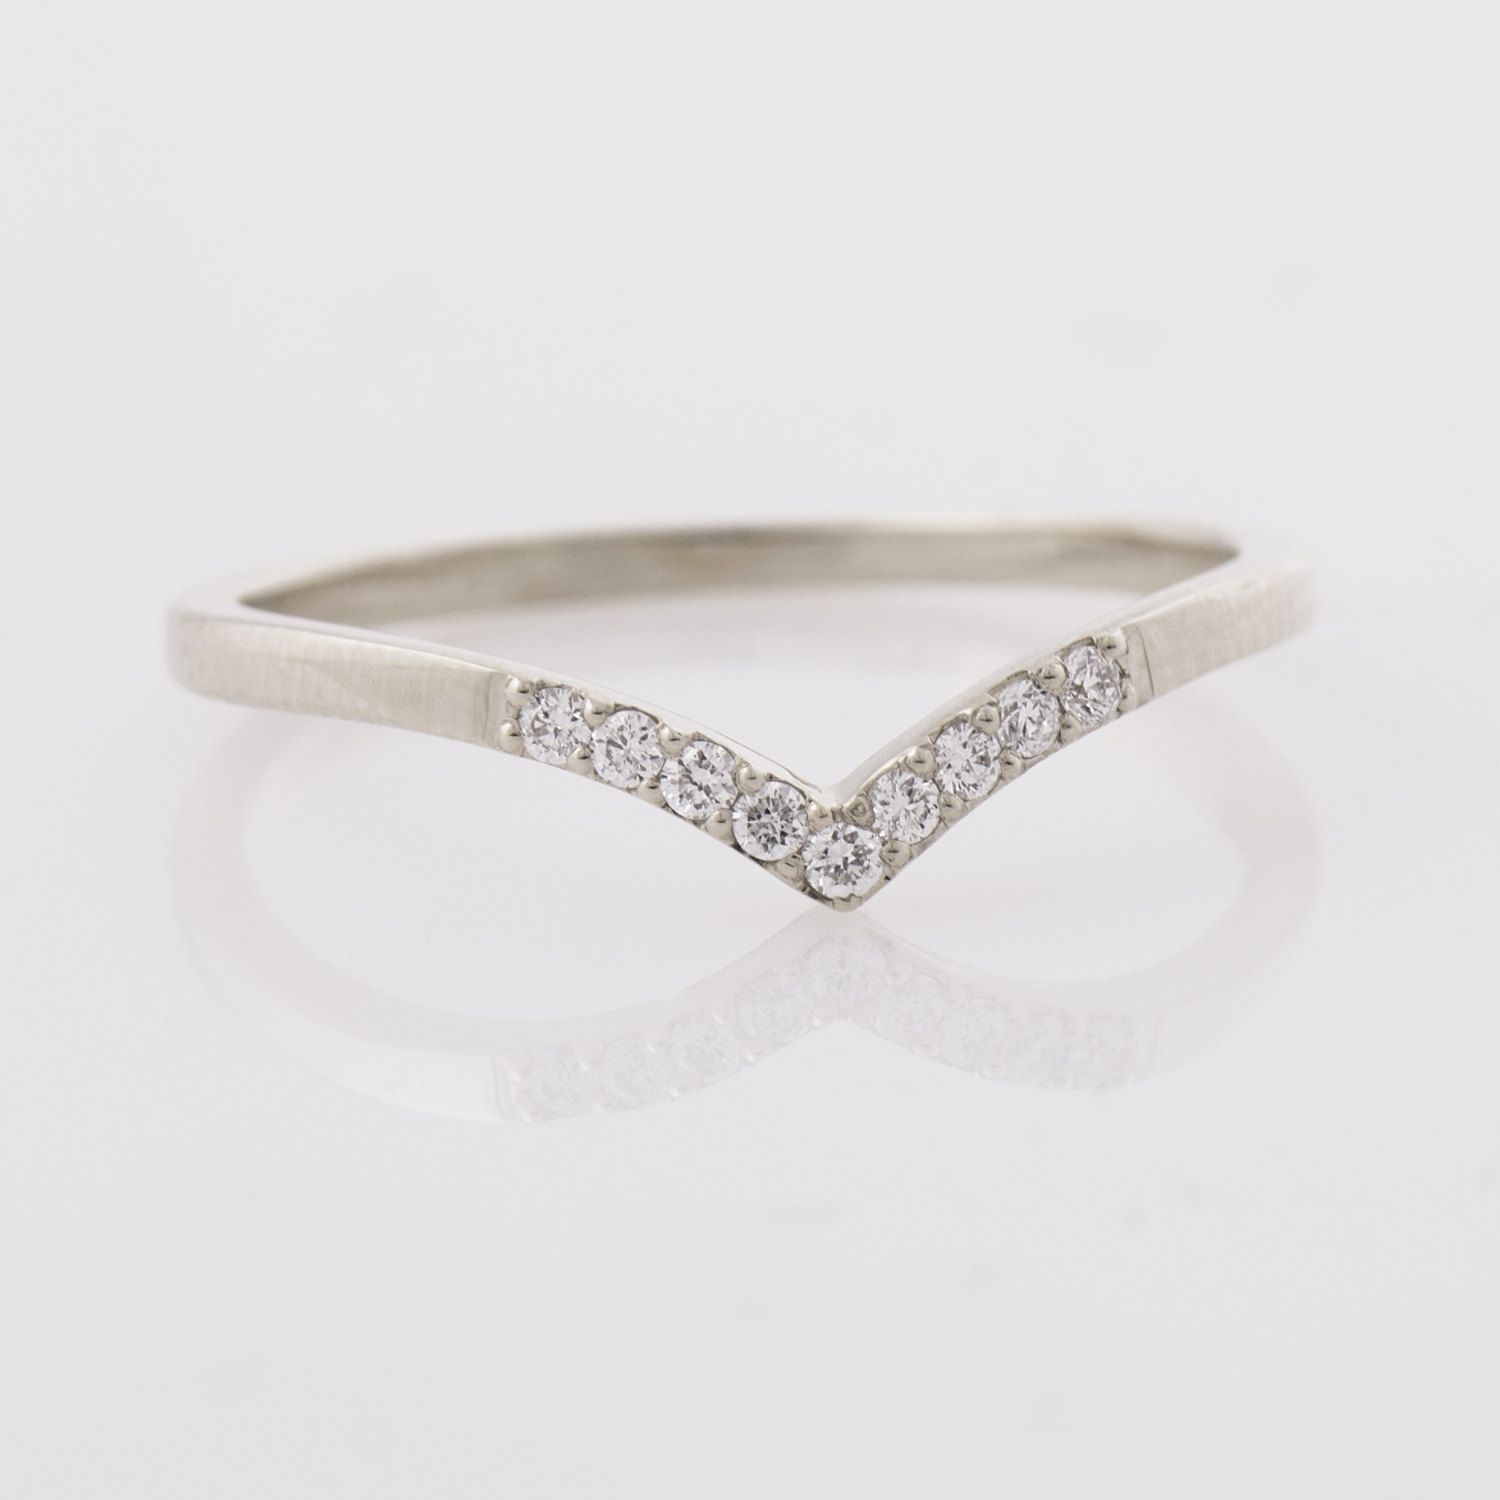 Chevron Diamond Rings | Wedding, Promise, Diamond, Engagement Intended For Newest Chevron Wedding Rings (View 9 of 15)